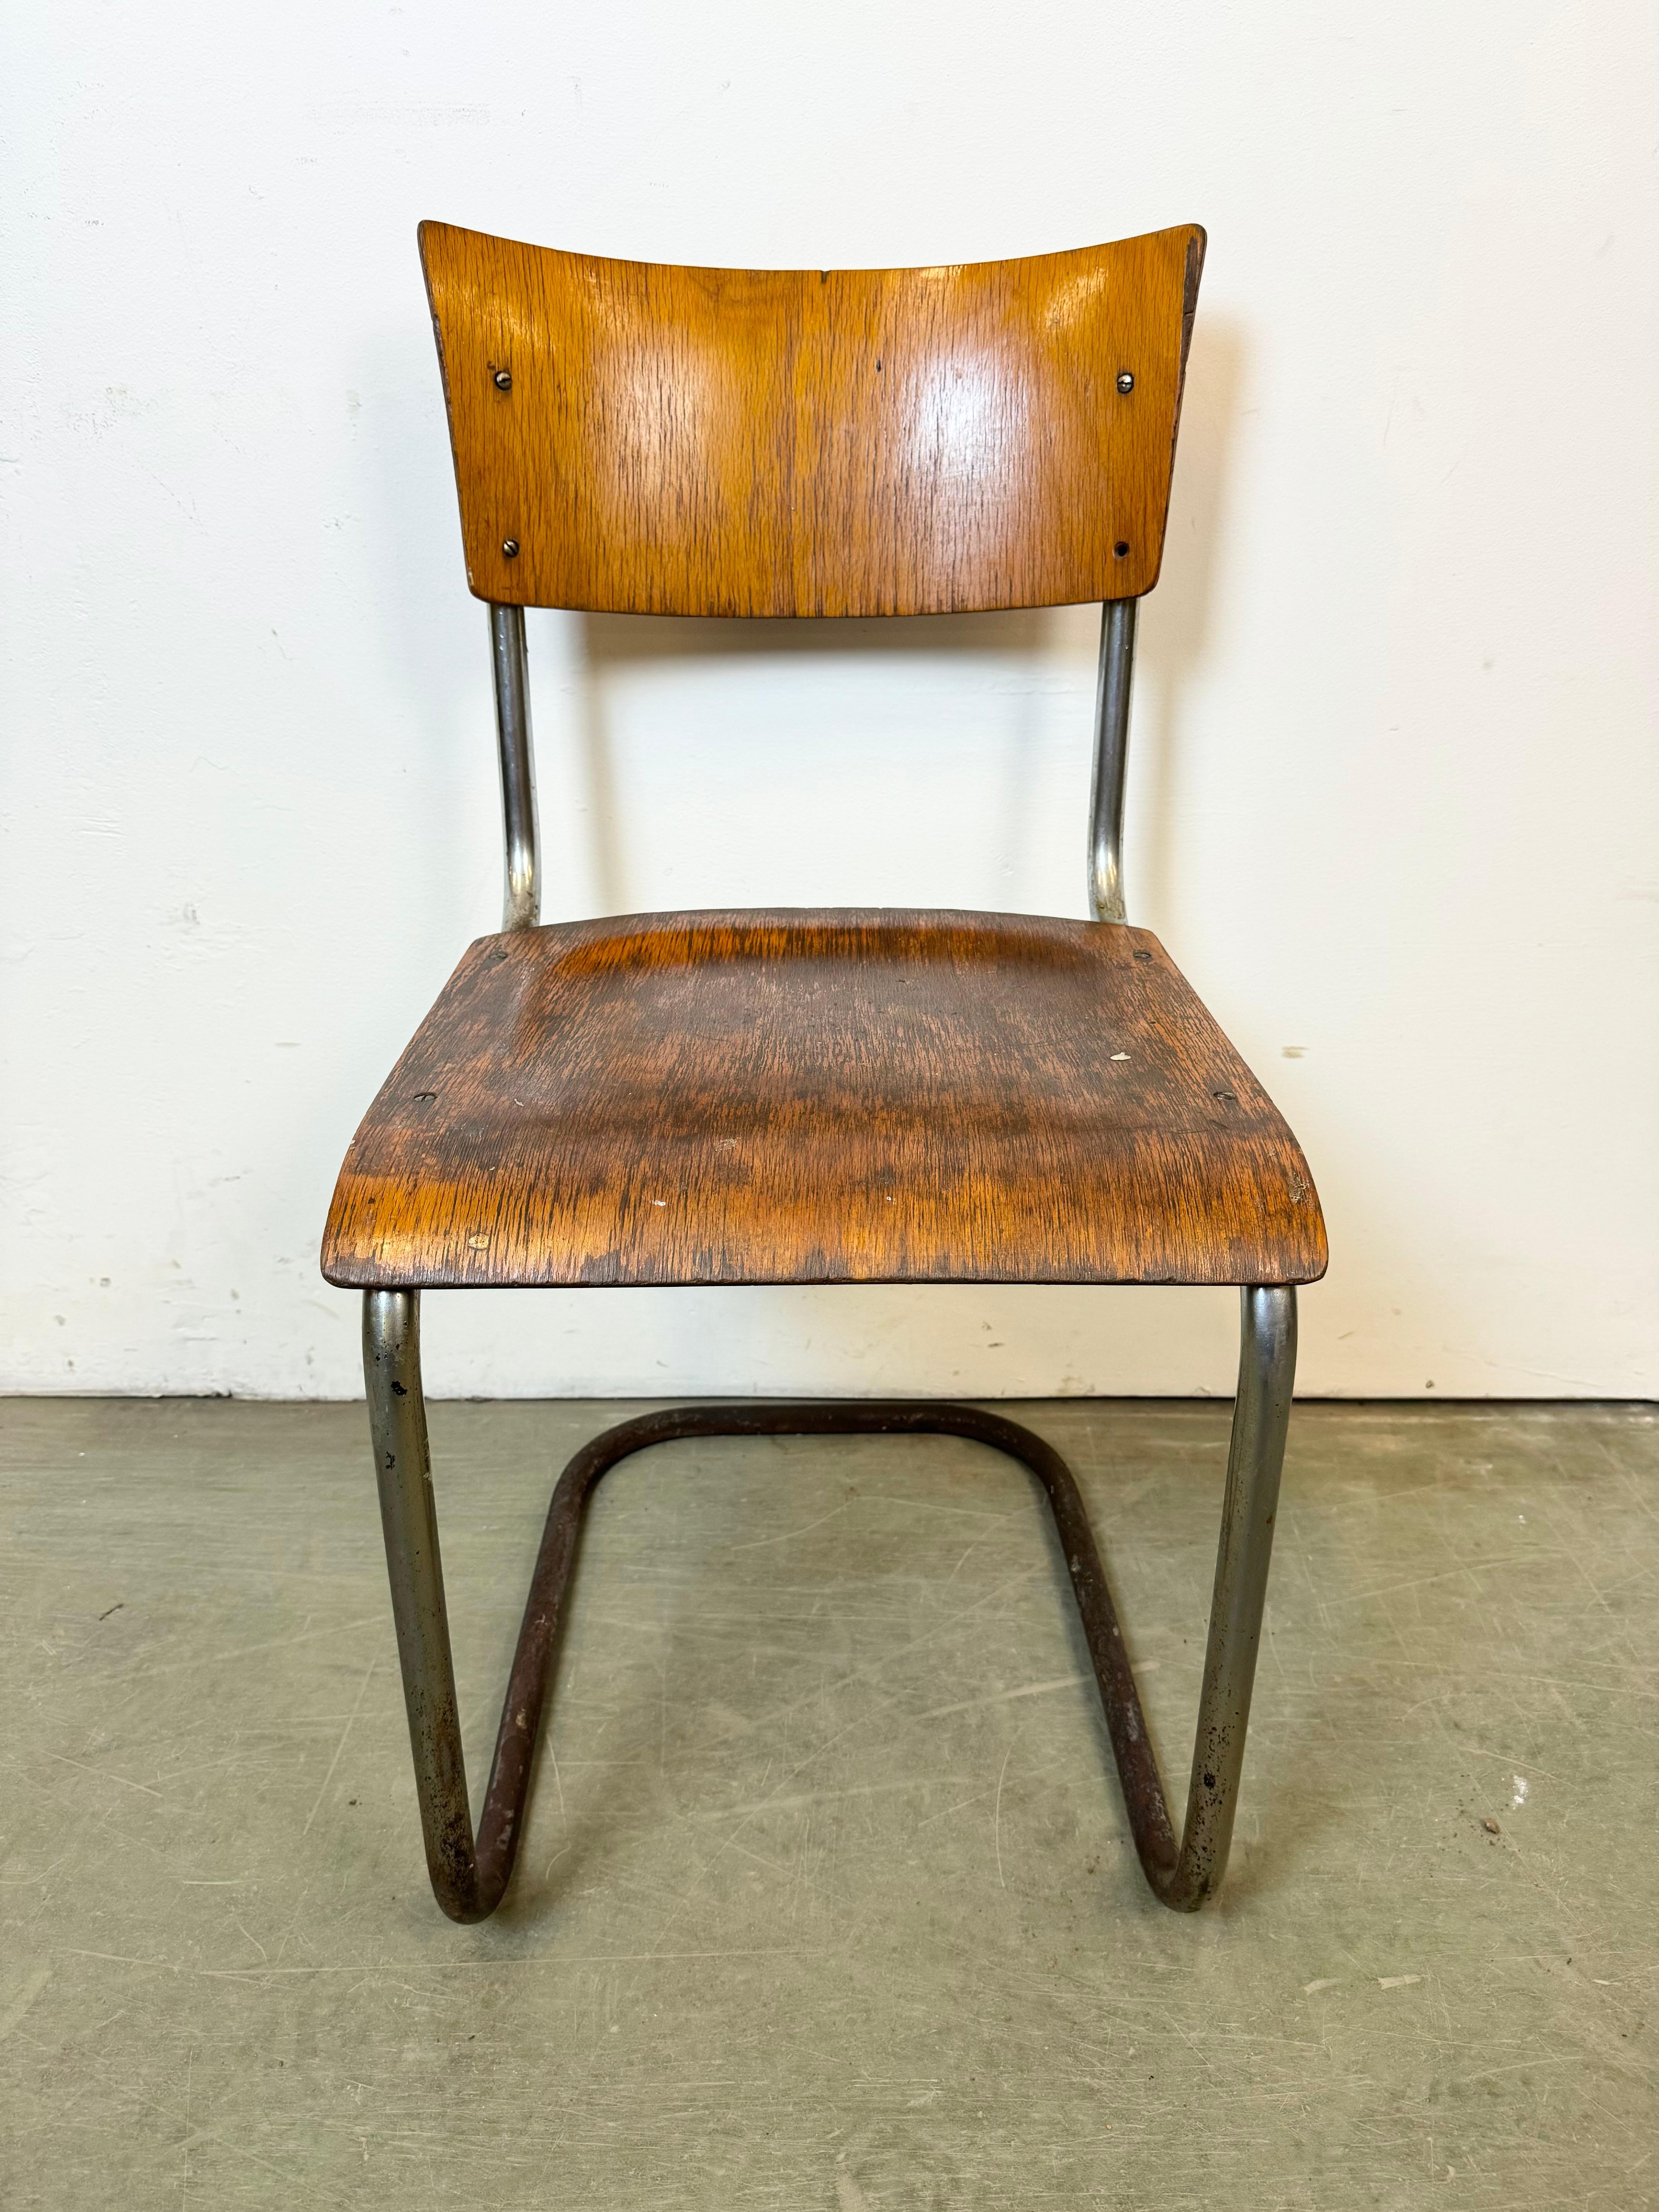 Vintage industrial chair made in former Czechoslovakia during the 1960s. The construction is made of chrome plated iron and the seat and backrest are made of plywood. The weight of the chair is 5 kg.
